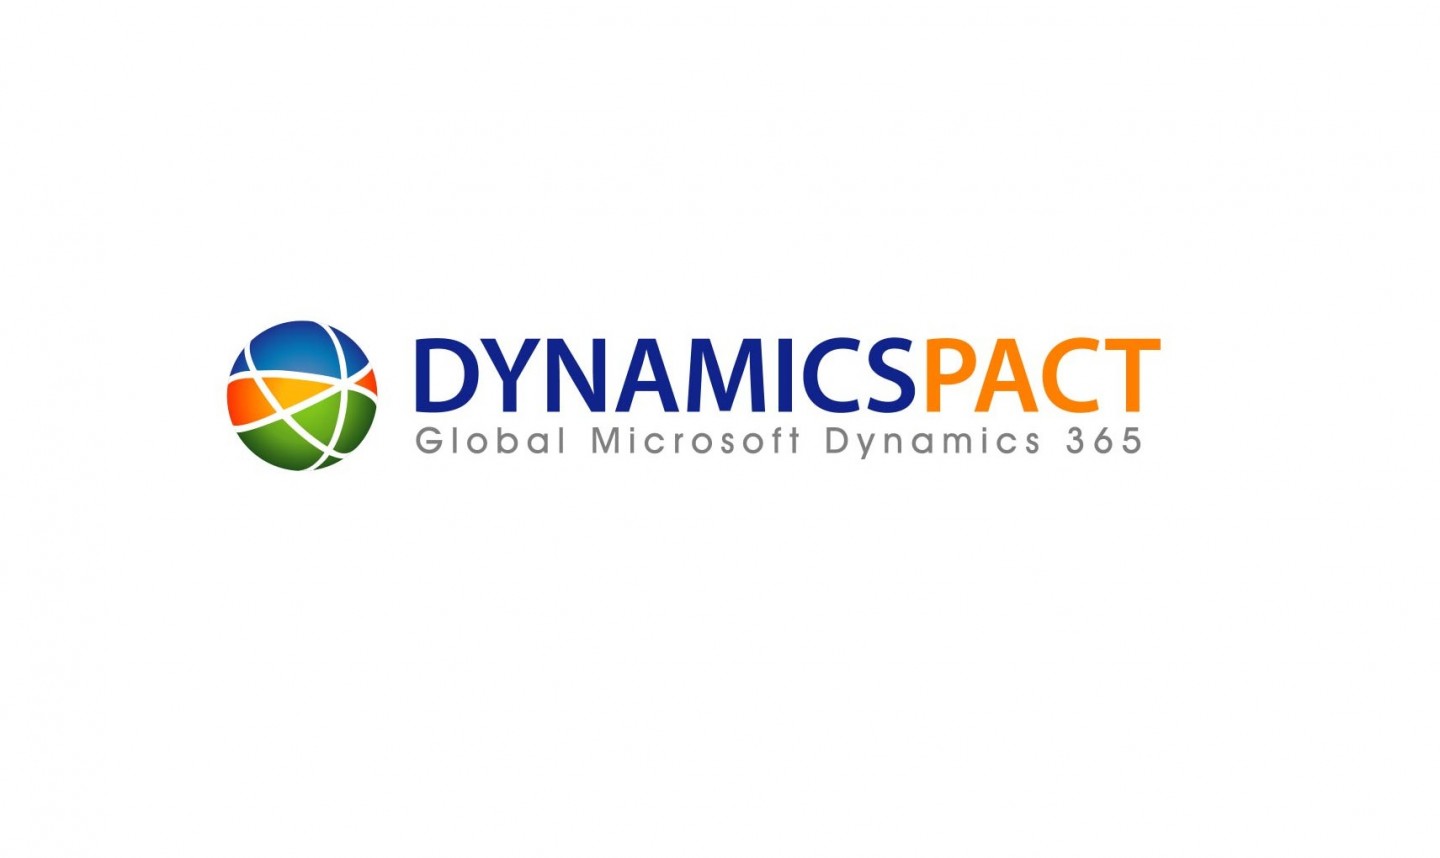 Sycor is a member of DYNAMICSPACT